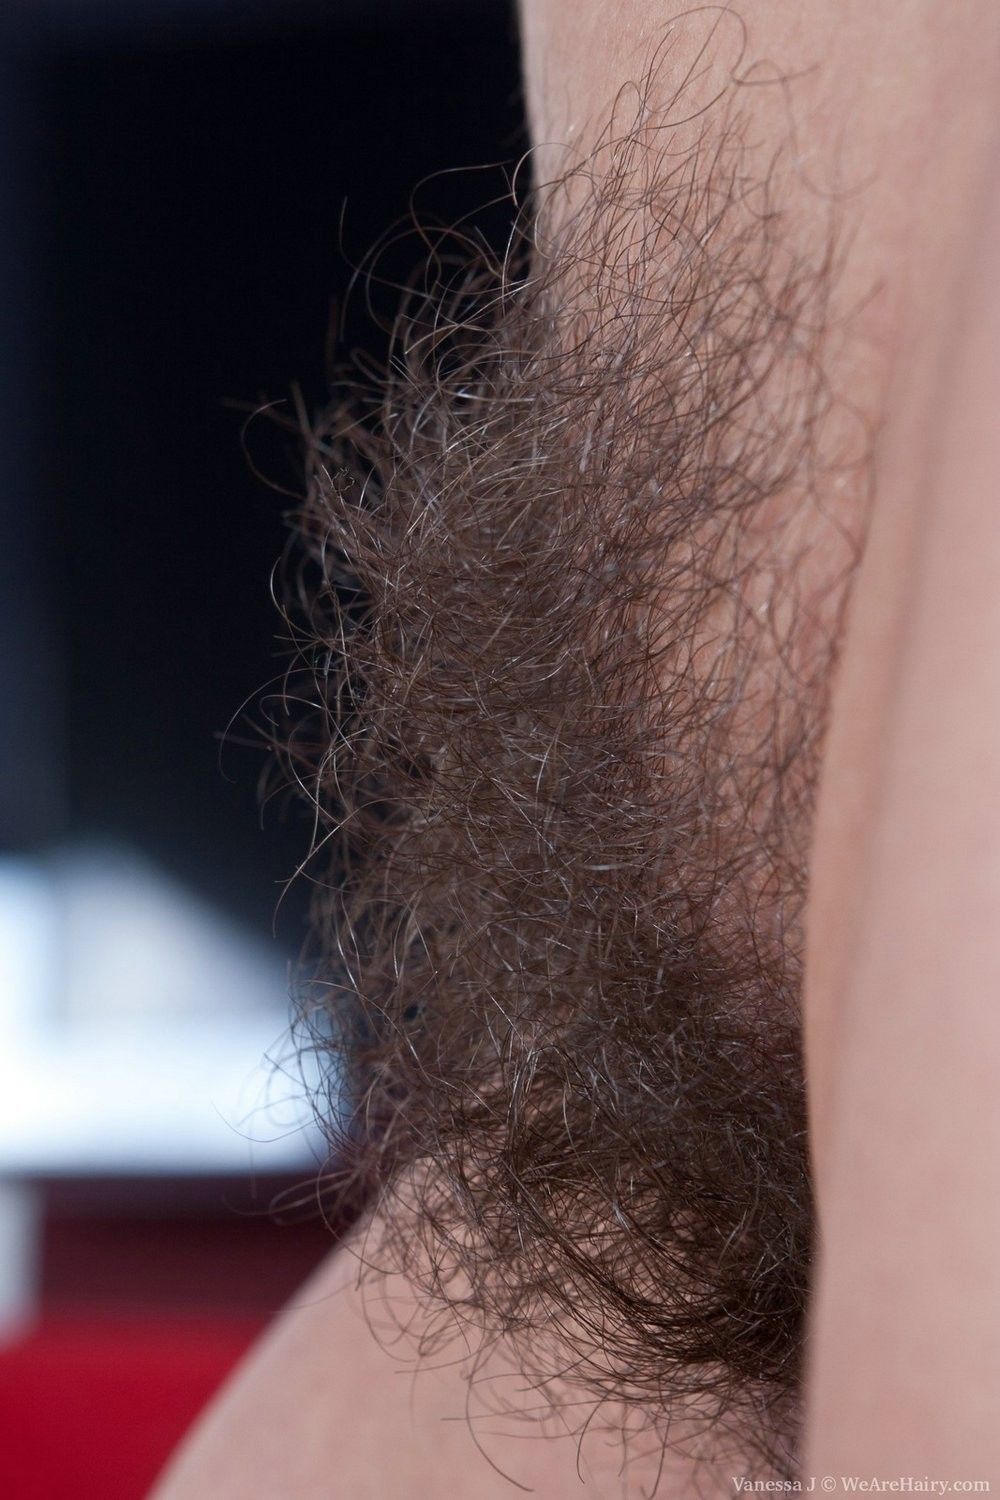 Vanessa j loves to show her incredibly hairy body